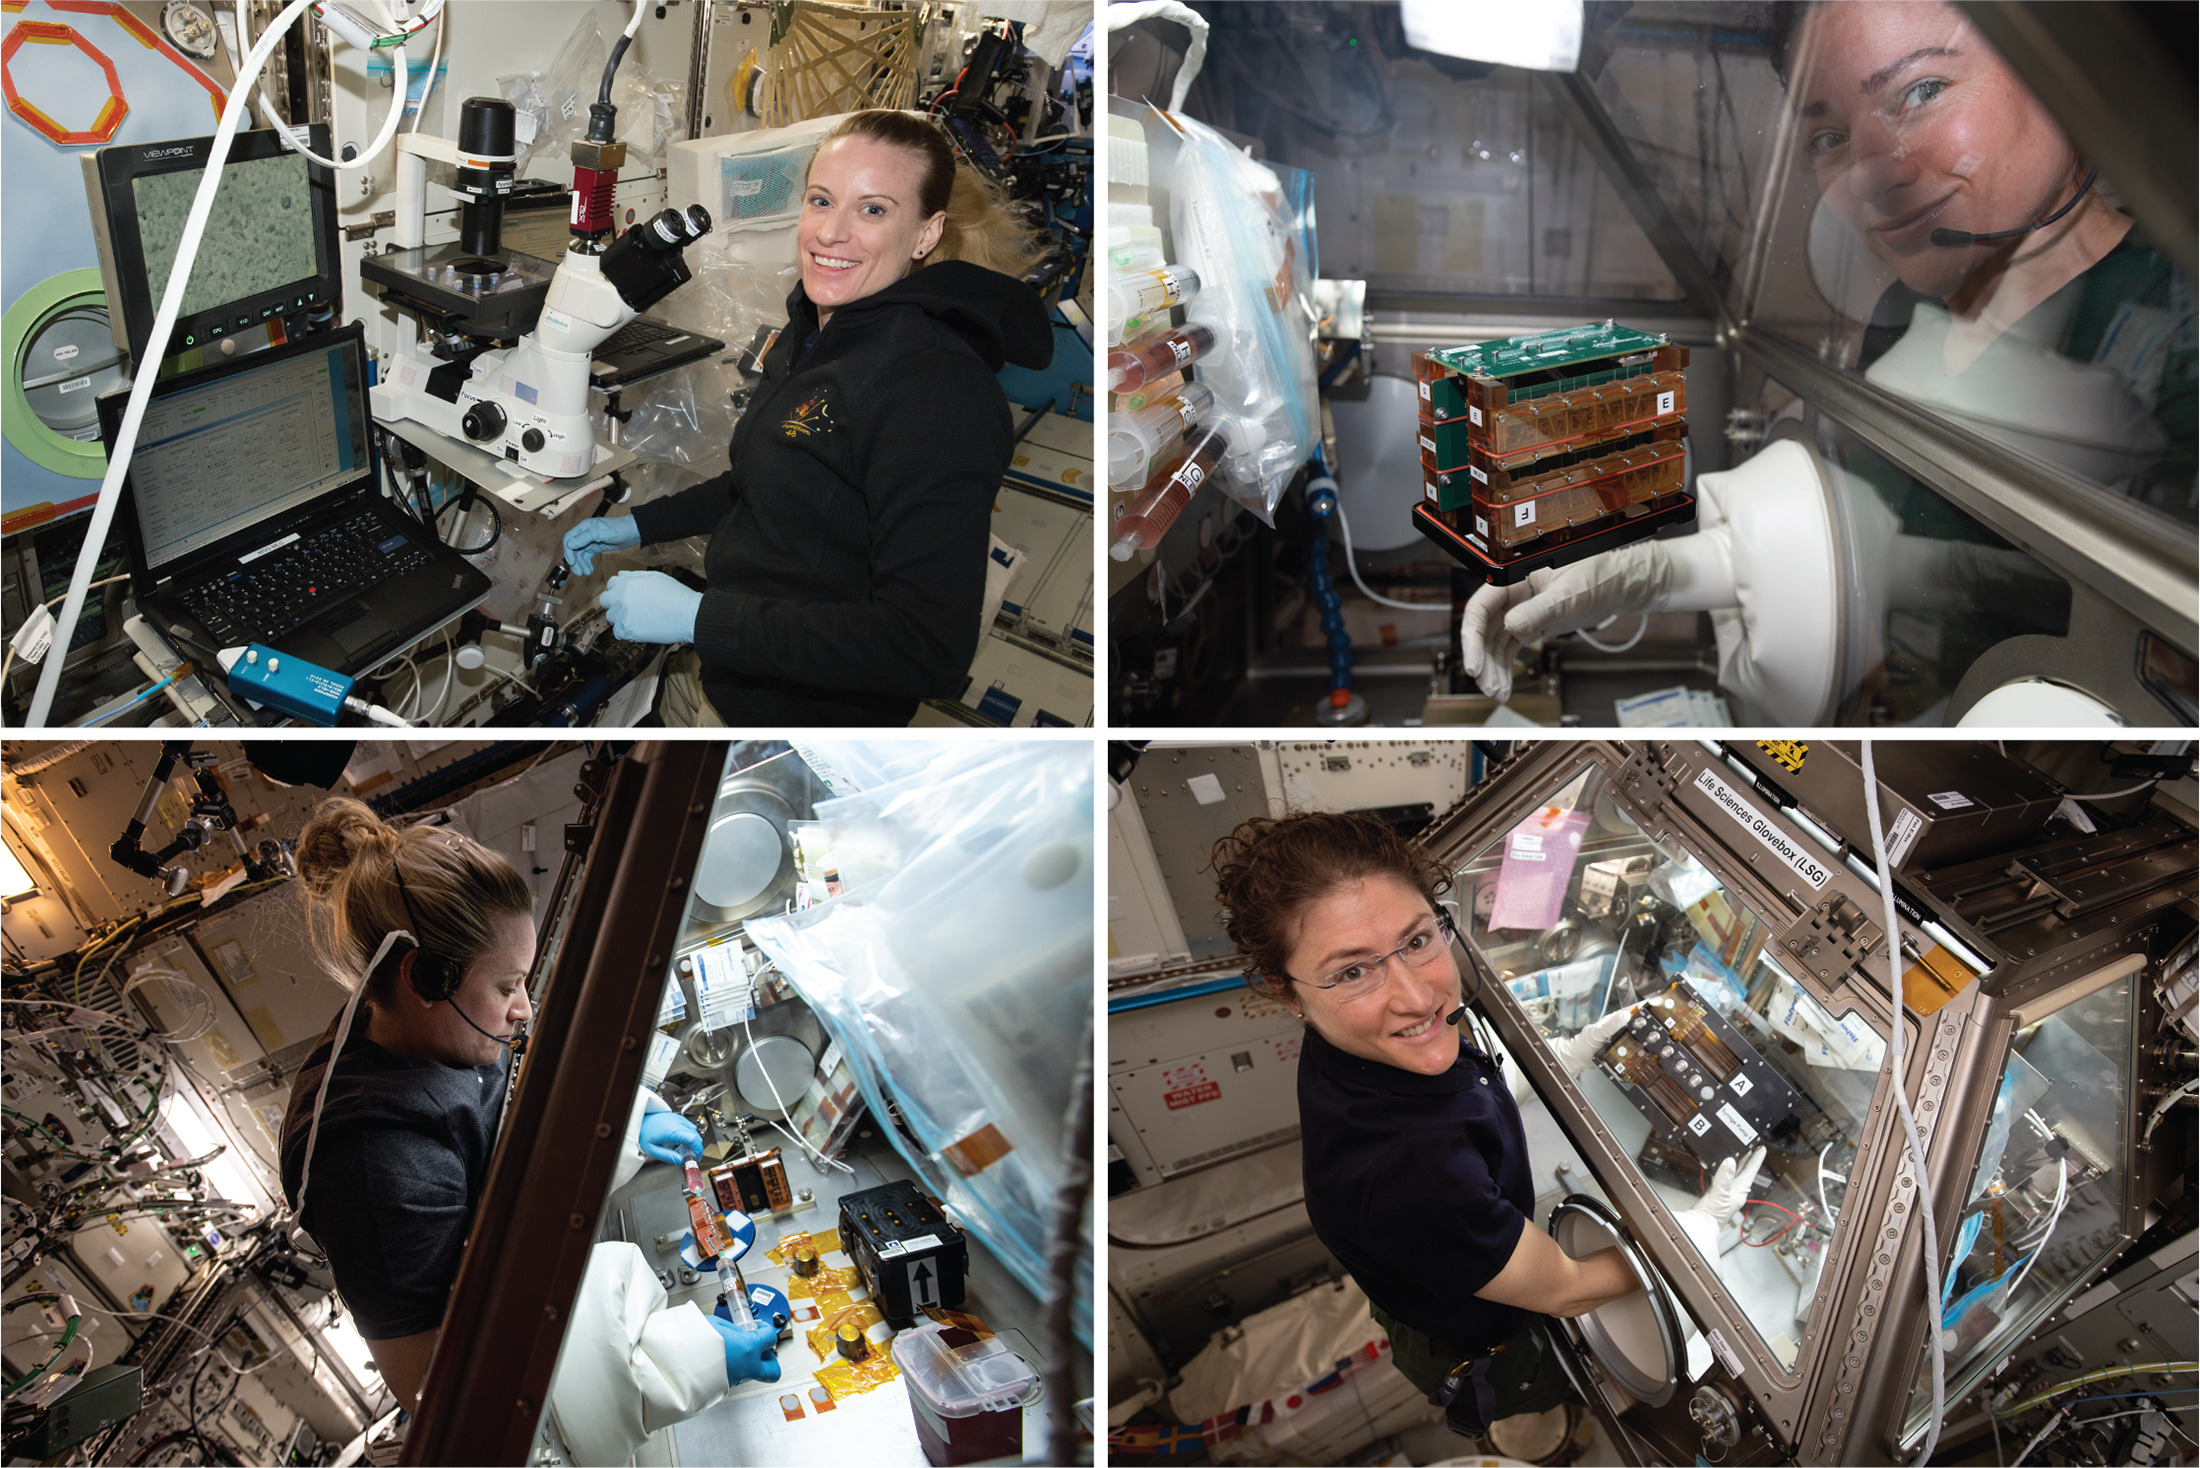 Images of astronauts doing stem cell research on the International Space Station.